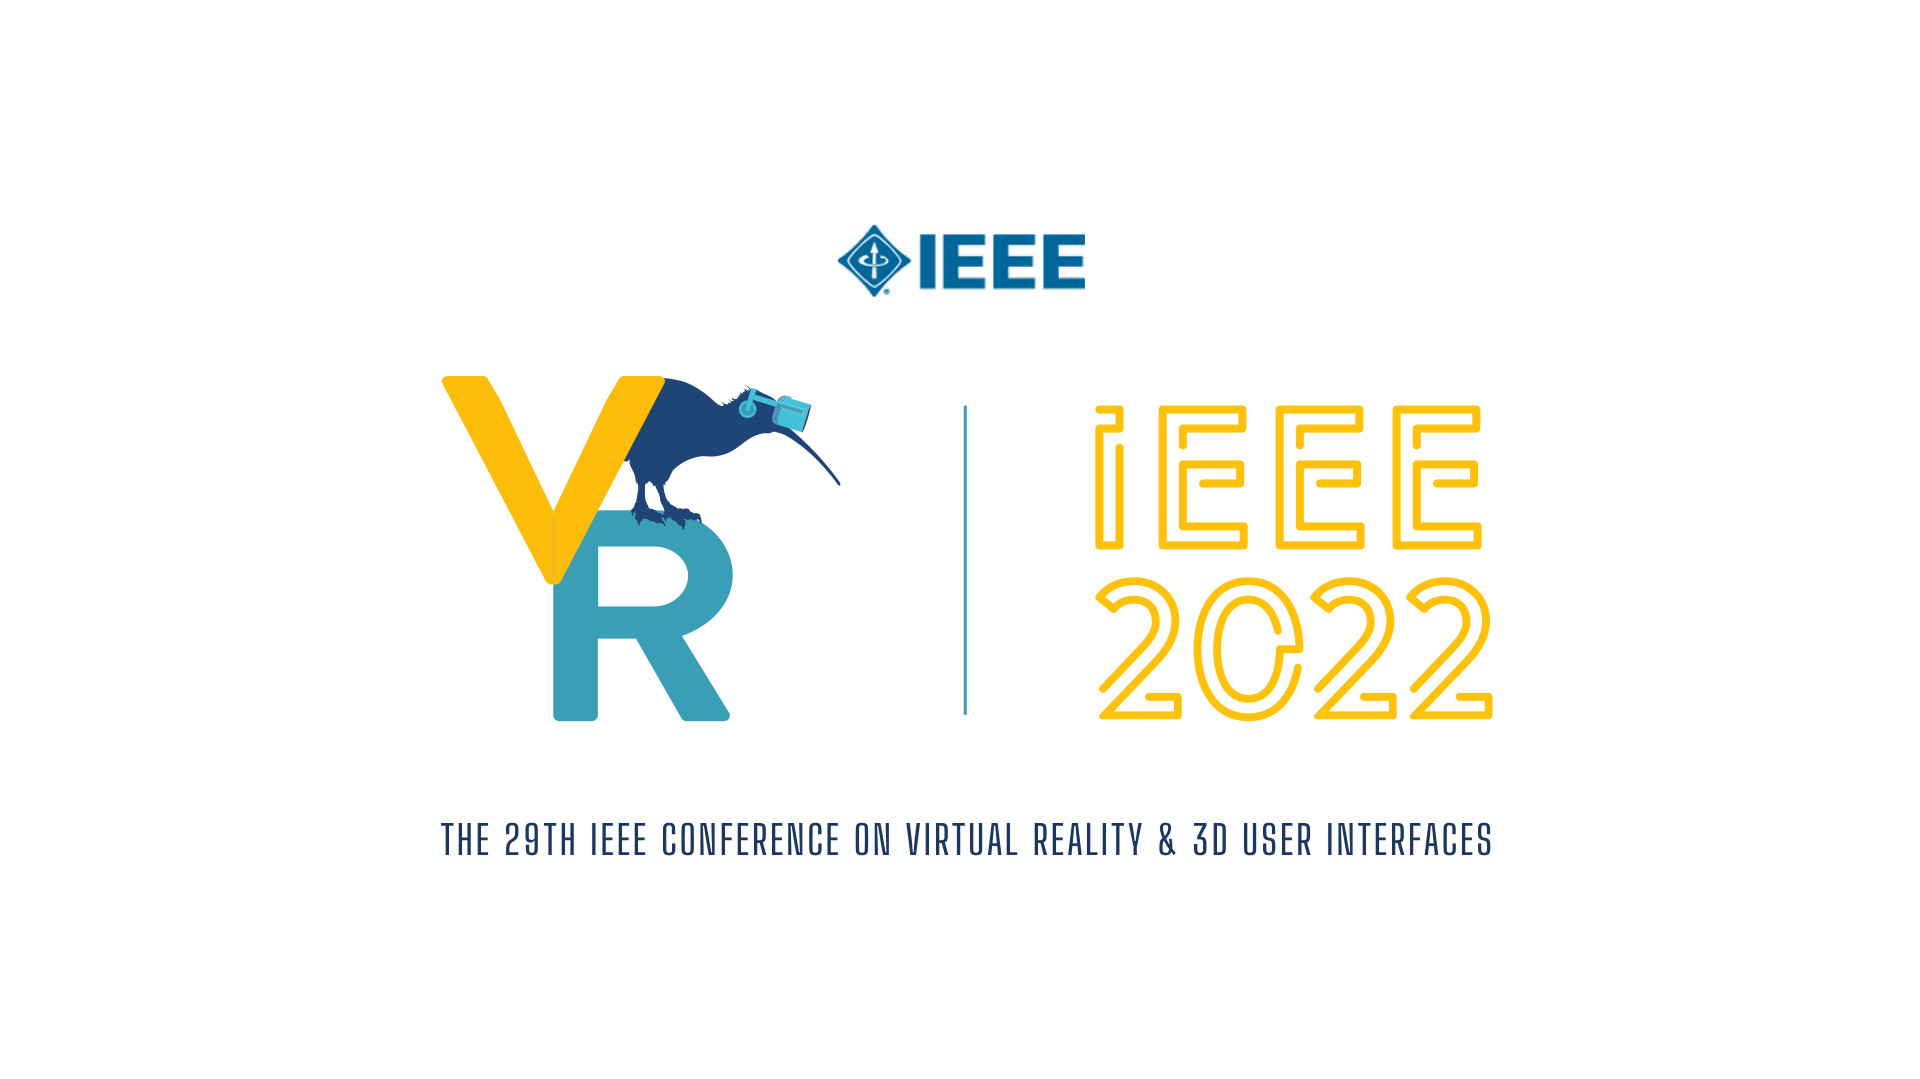 The IEEE VR 2022 logo with a white background. VR is written with a kiwi wearing a VR headset standing on top of the R.